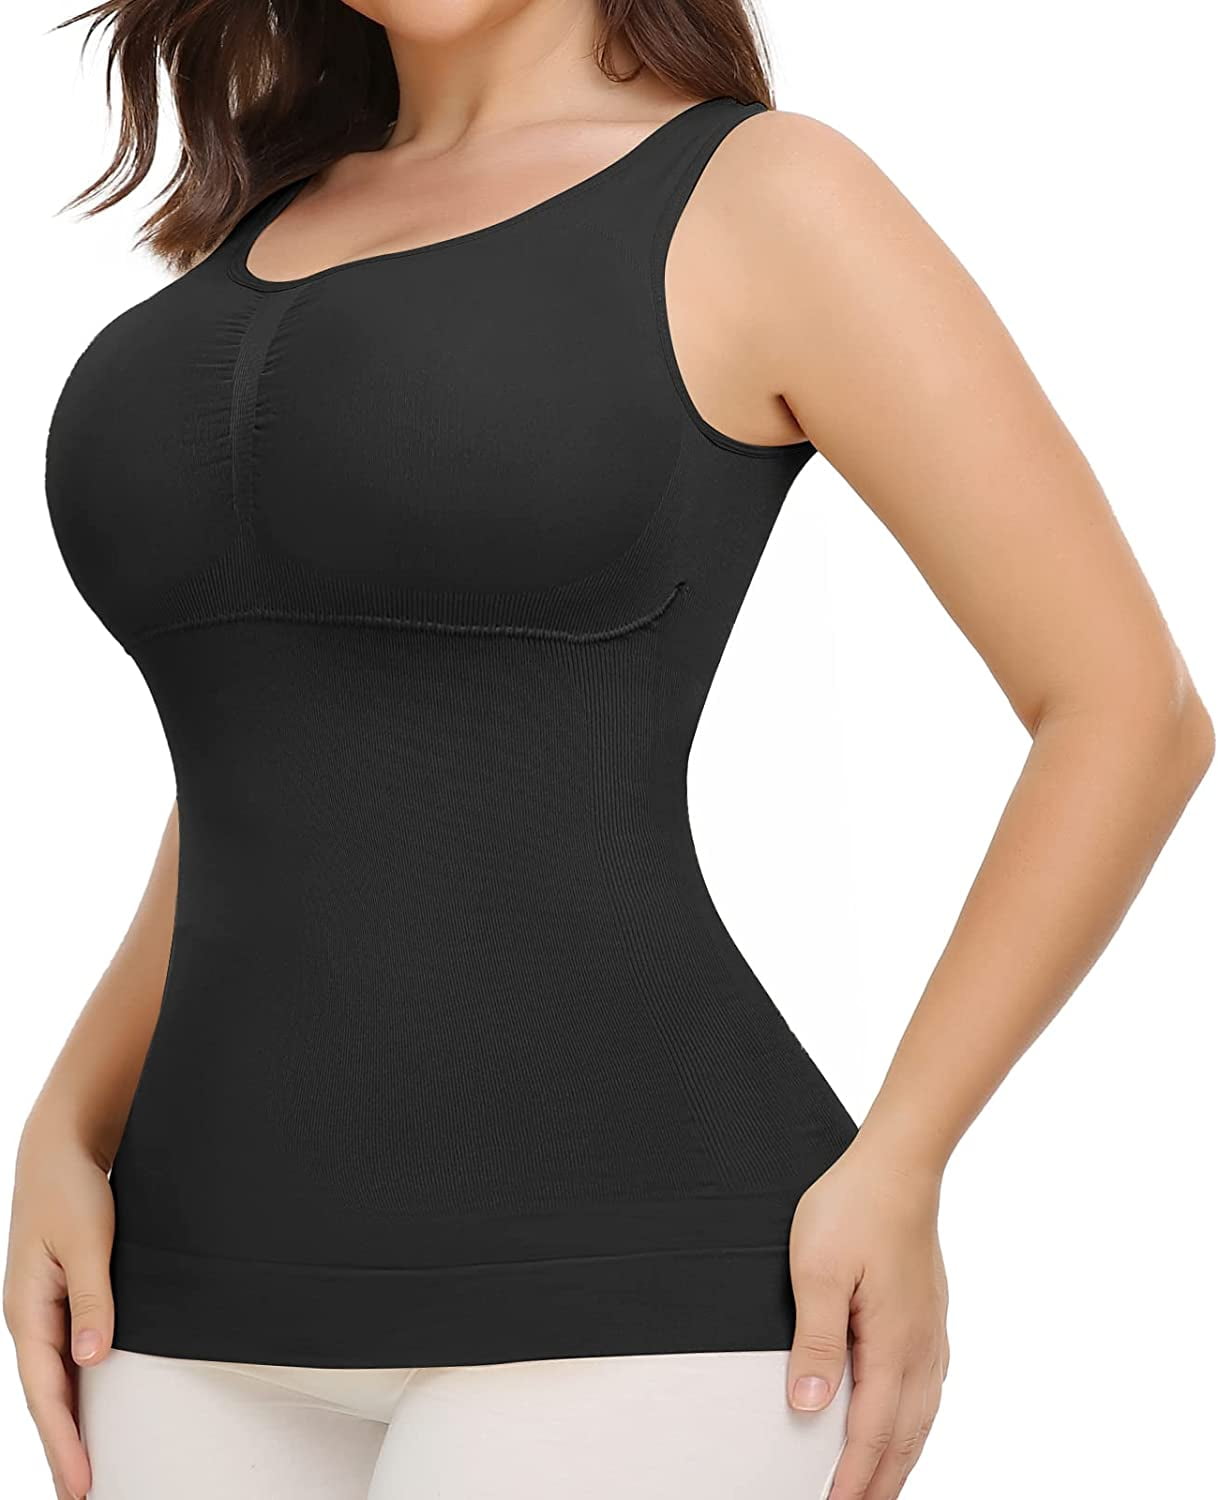 FITVALEN Women Shaper Cami with Built in Bra Shapewear Tank Top Tummy  Control Camisole Slimming Compression Undershirt